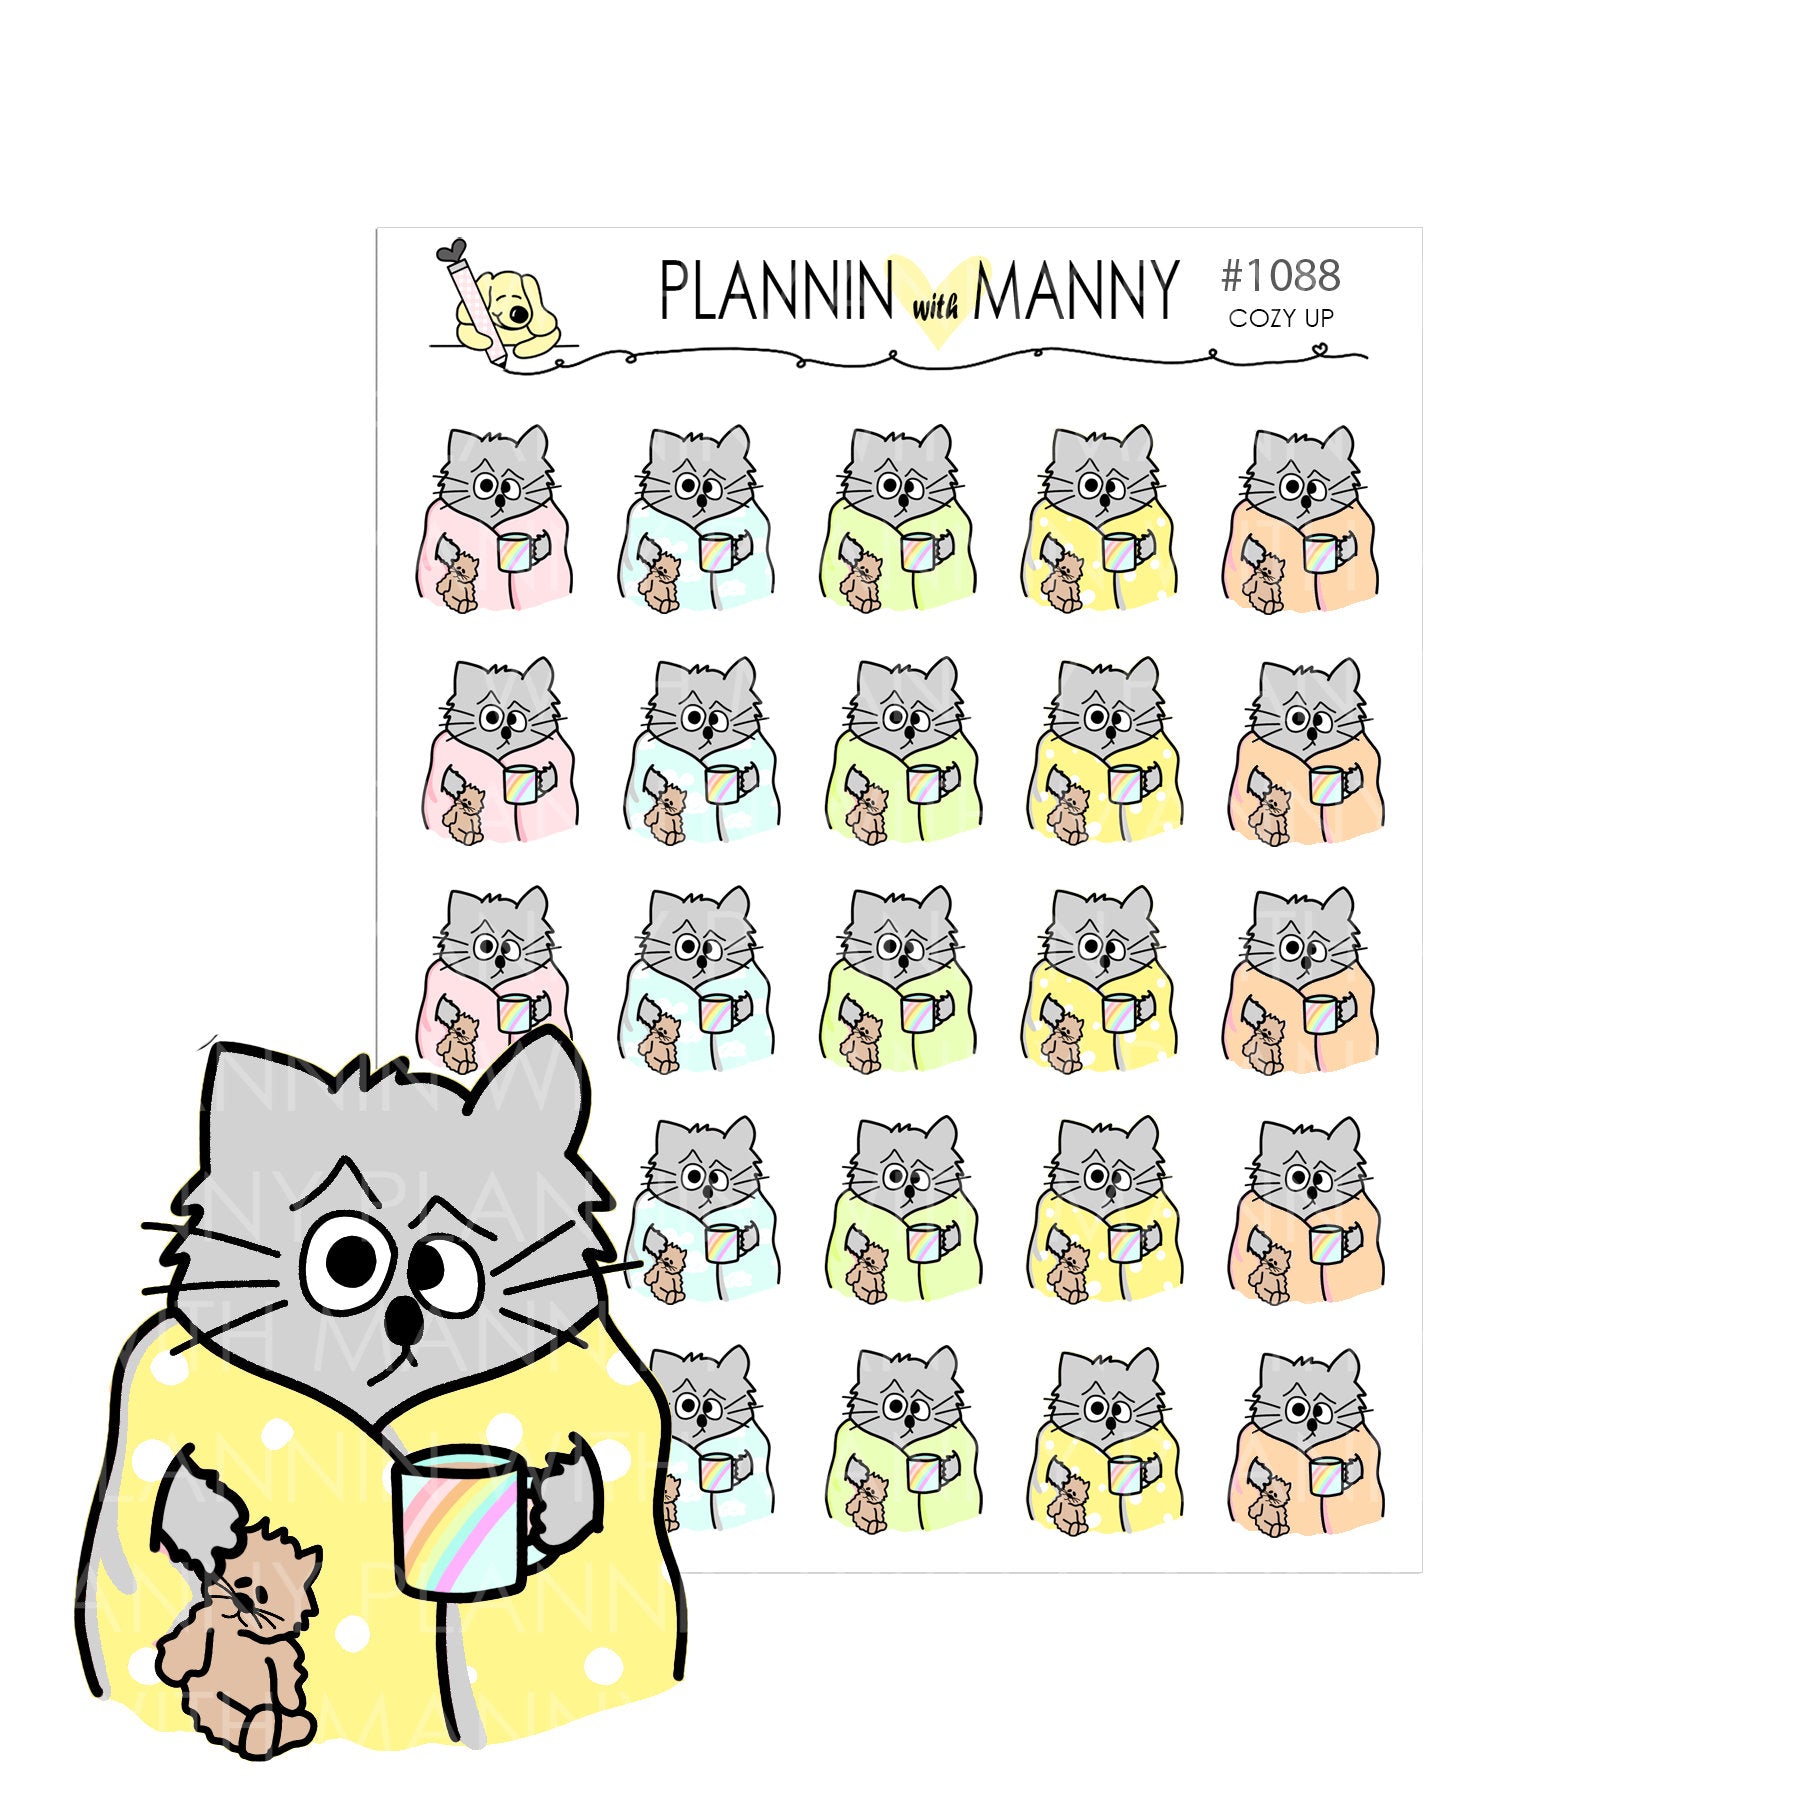 1088 Cozy Up Planner Stickers